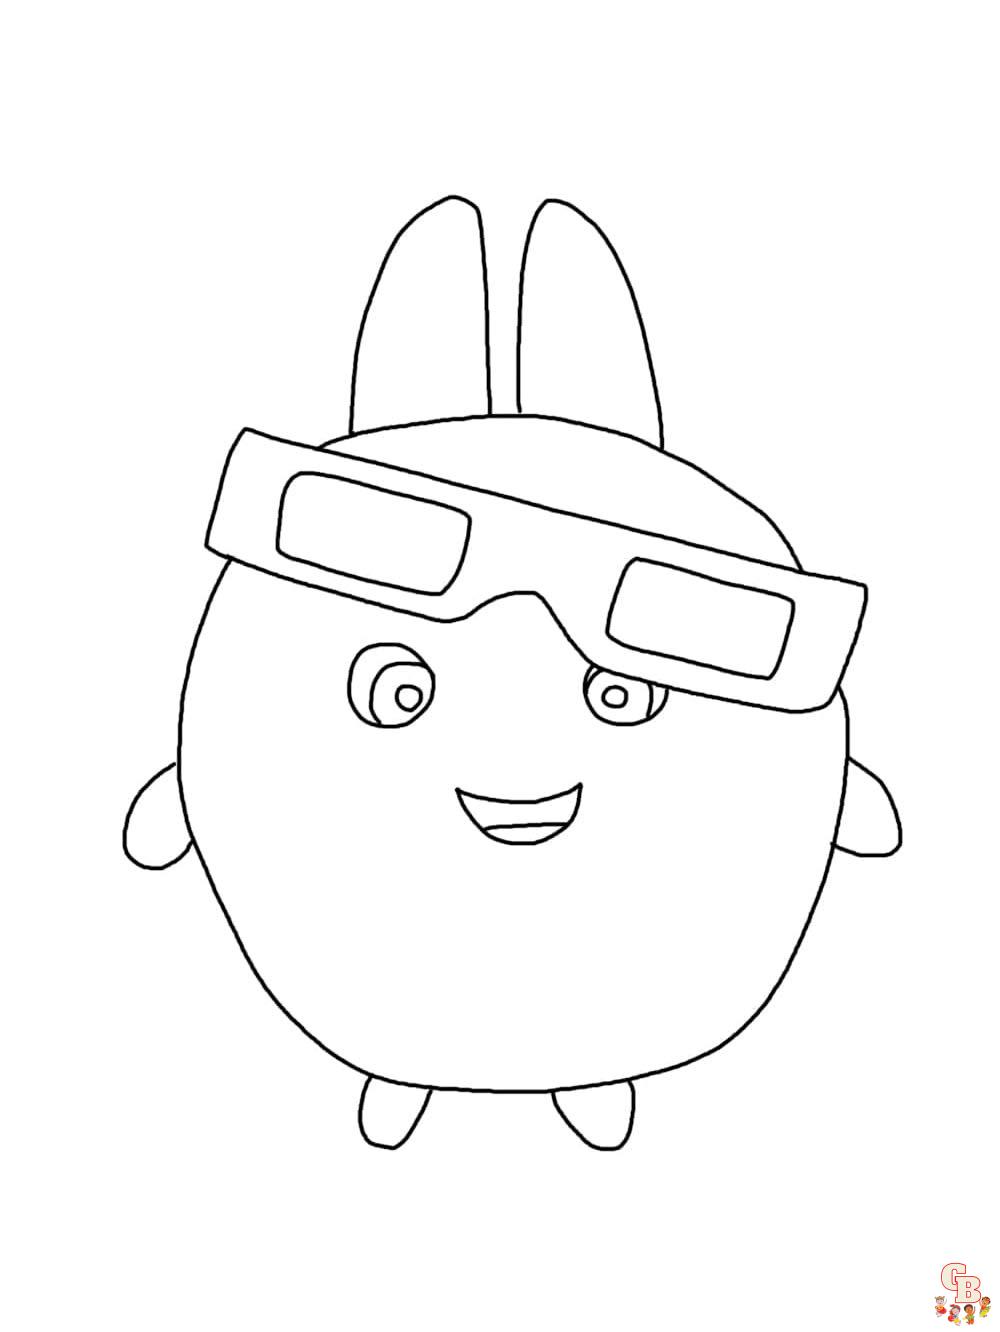 Sunny Bunnies Coloring Pages